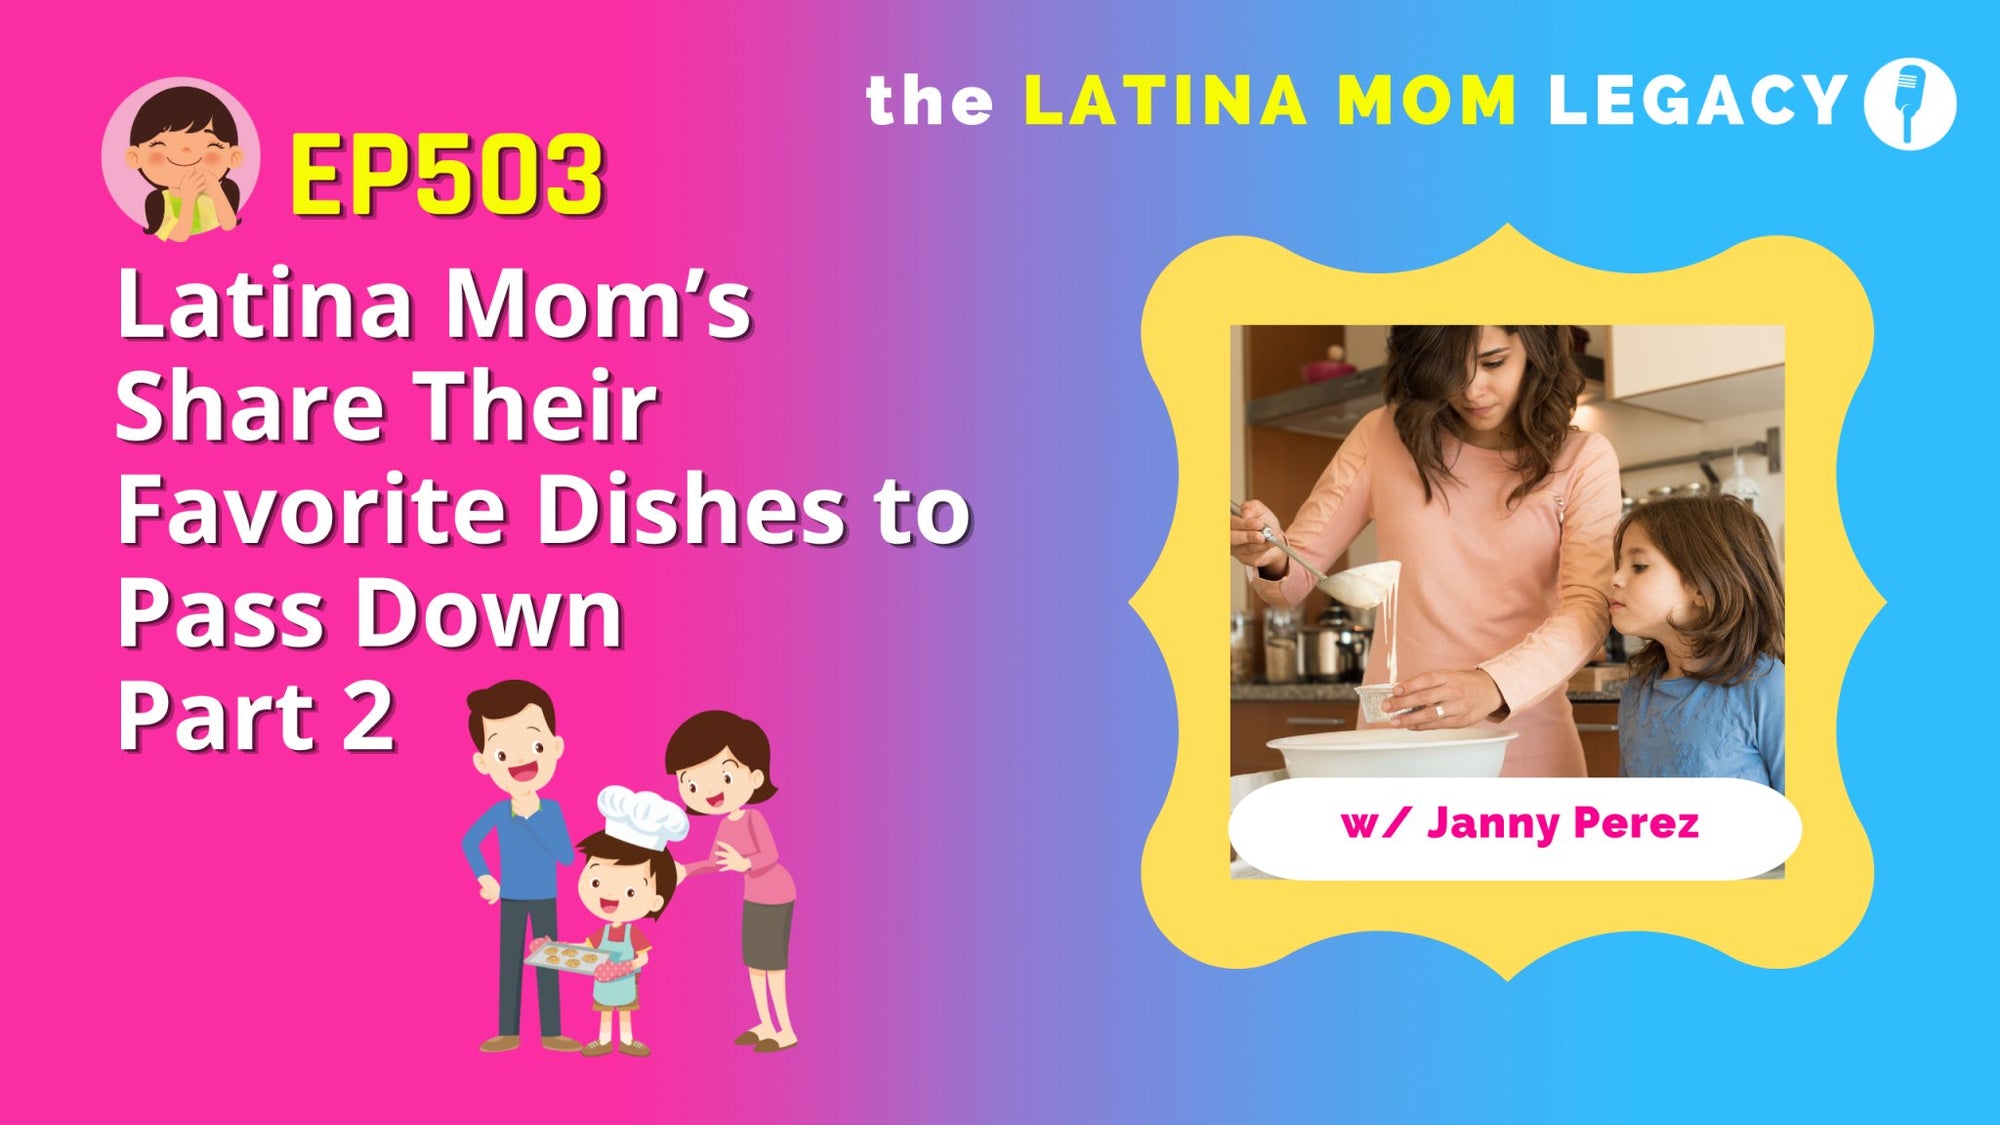 503-Hispanic Heritage Month - Latina Mom's Share Their Favorite Dishes to Pass Down Part 2 - Mi LegaSi